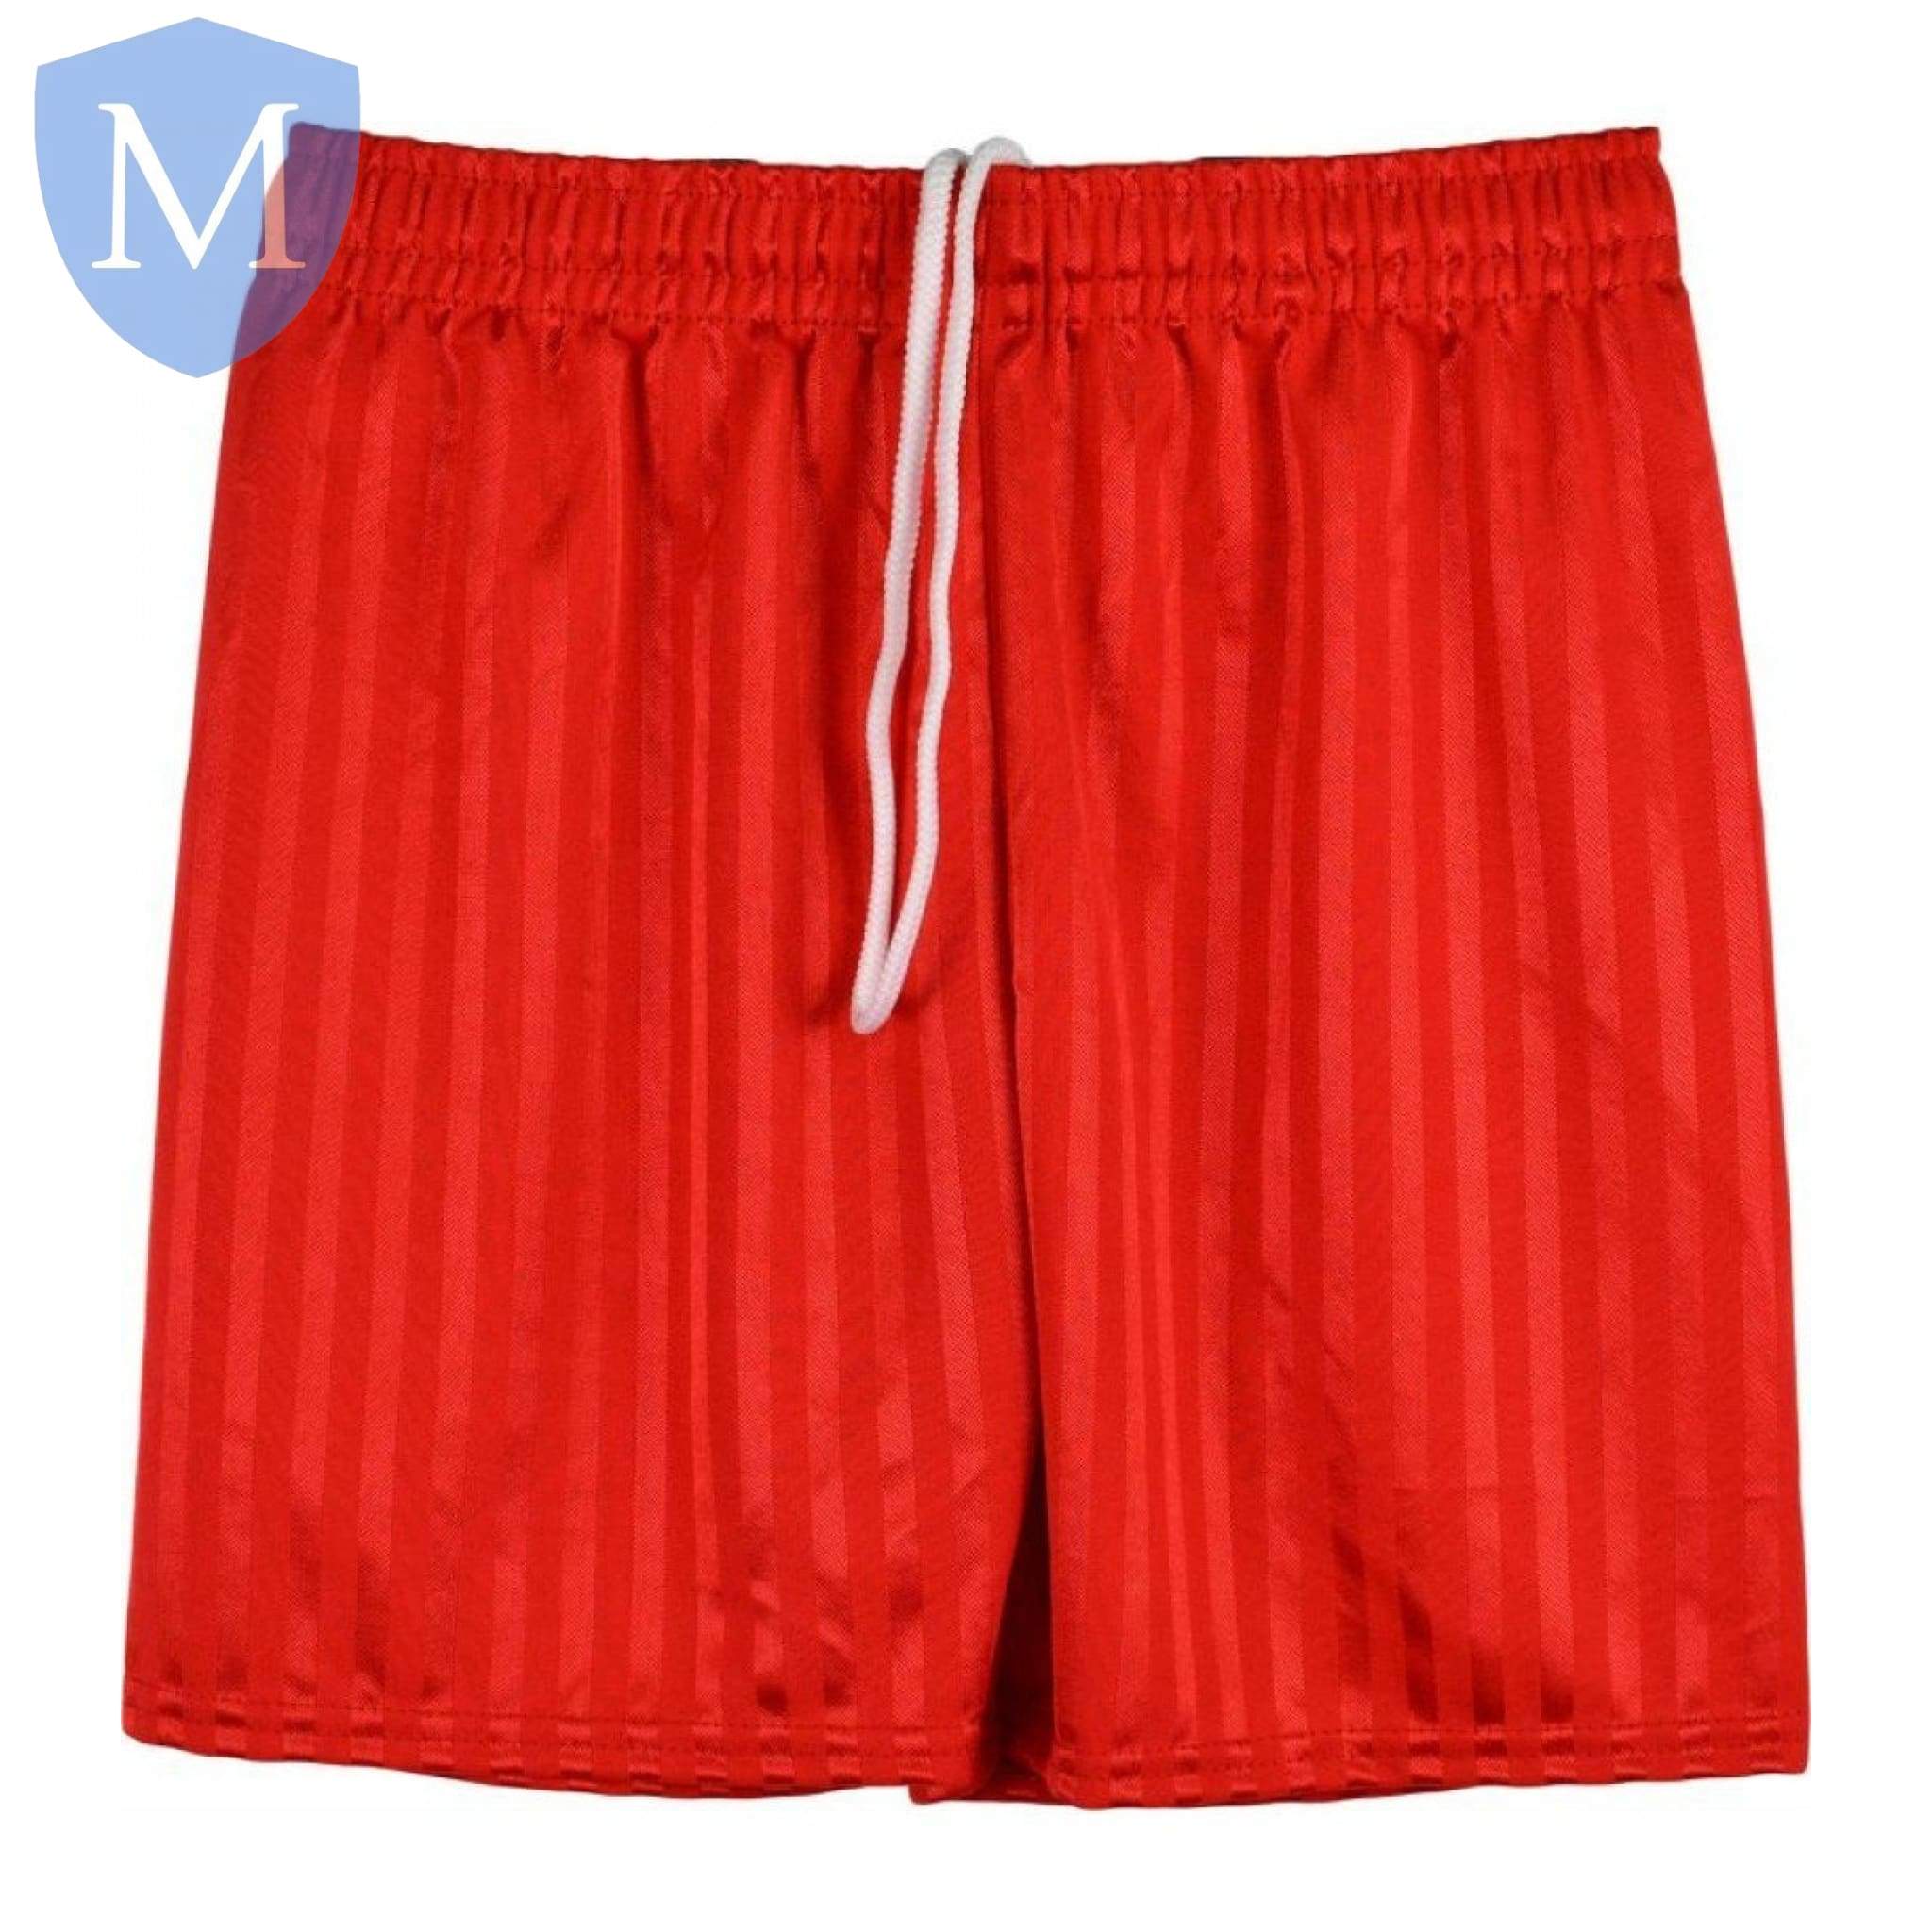 Plain Sports Shadow Shorts - Red Size 11-12,Size 2-3,Size 2XL,Size 3-4,Size 4-5,Size 5-6,Size 7-8,Size 9-10,Size Large,Size Medium,Size Small,Size XL